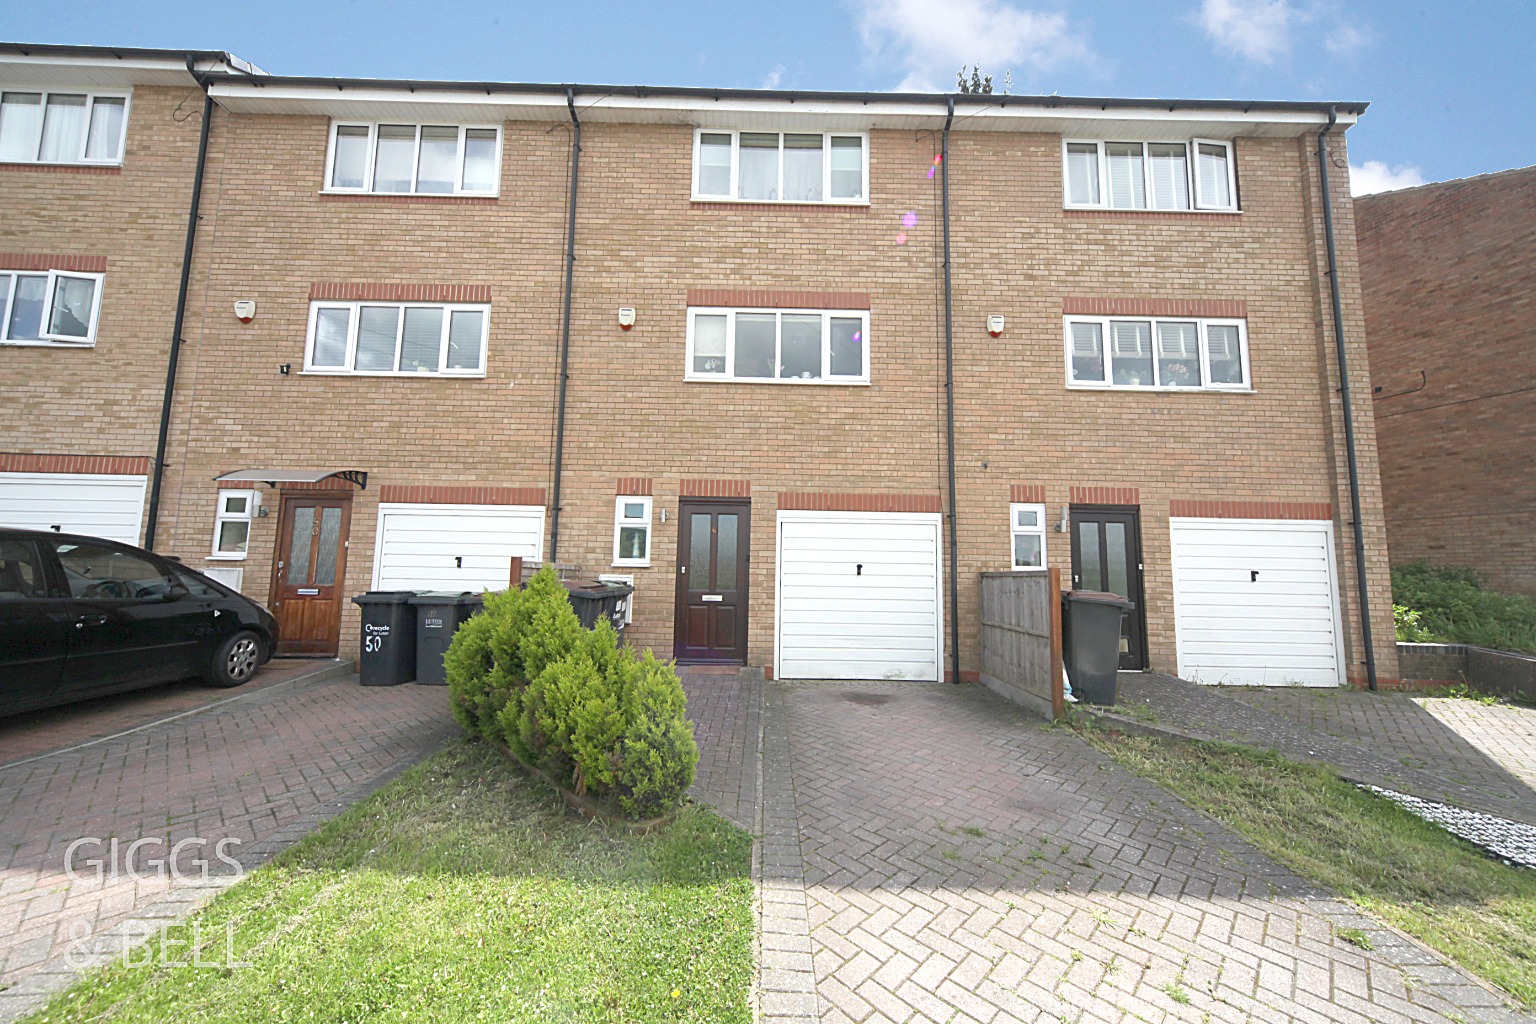 2 bed terraced house for sale in Fermor Crescent, Luton - Property Image 1